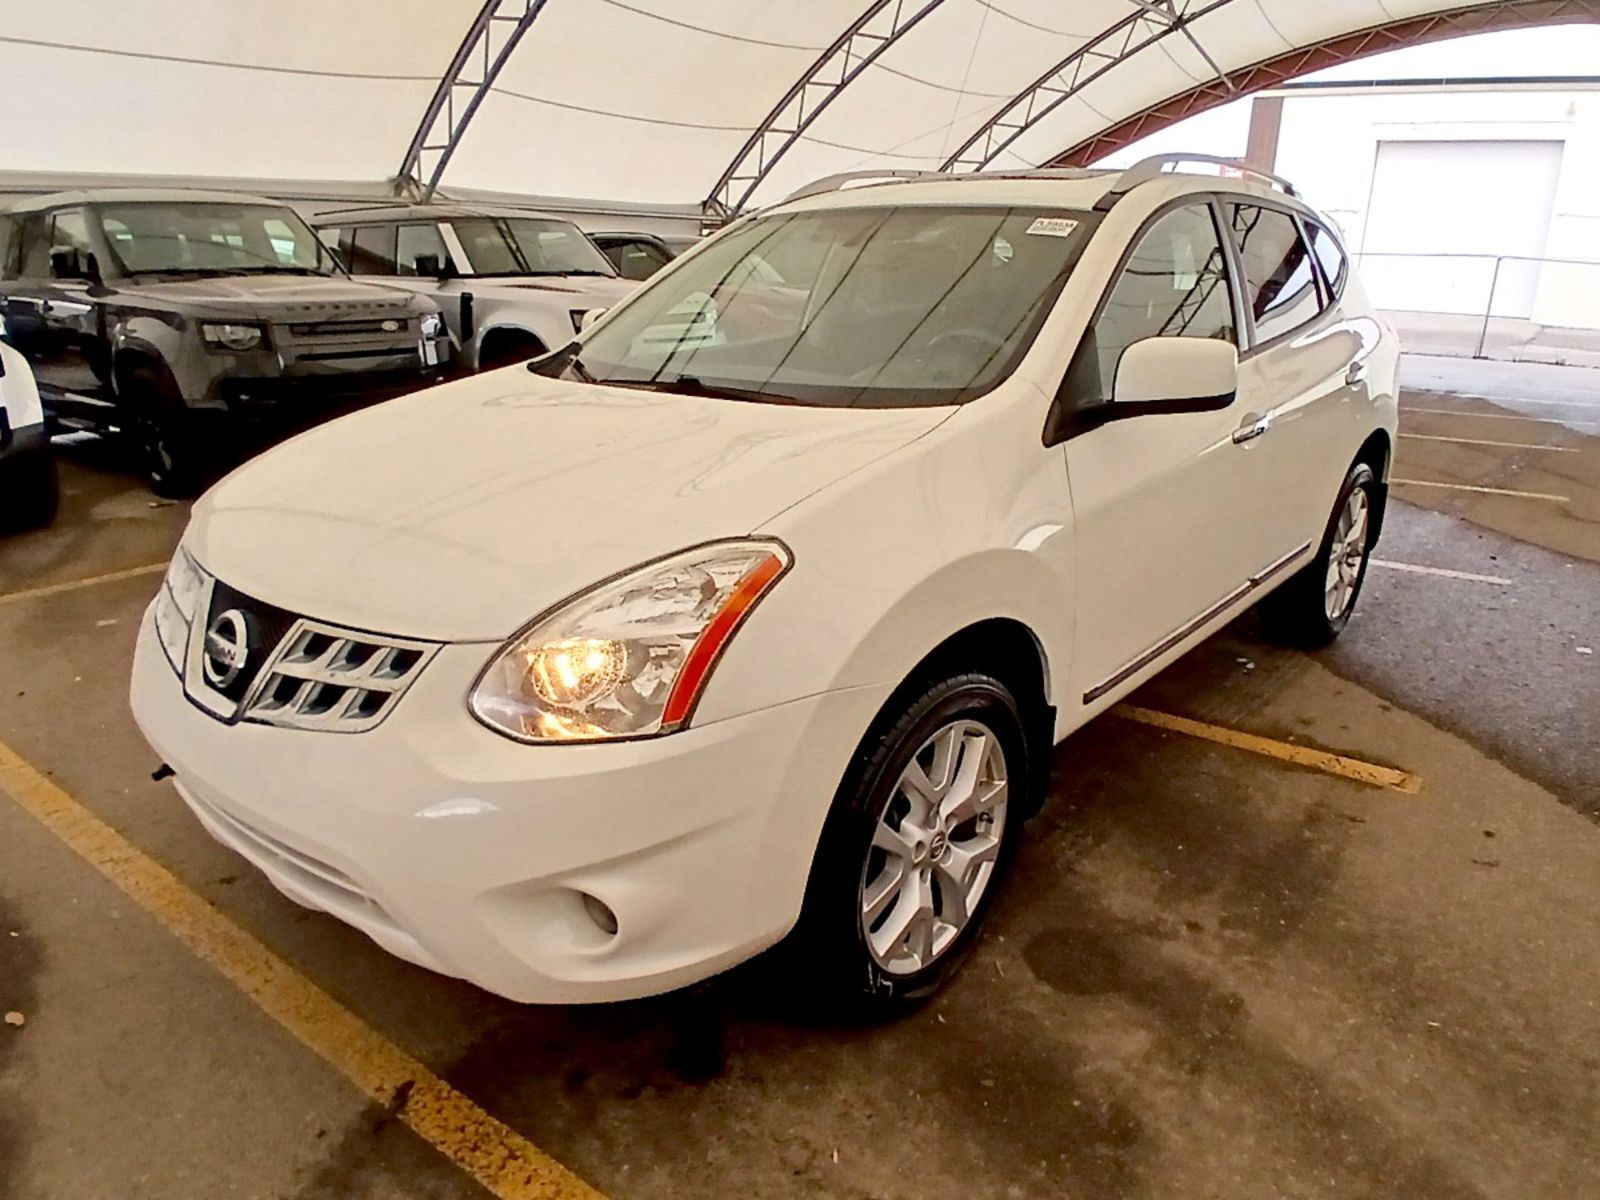 2012 Nissan Rogue SV - No Accidents, Low KMS, One Owner